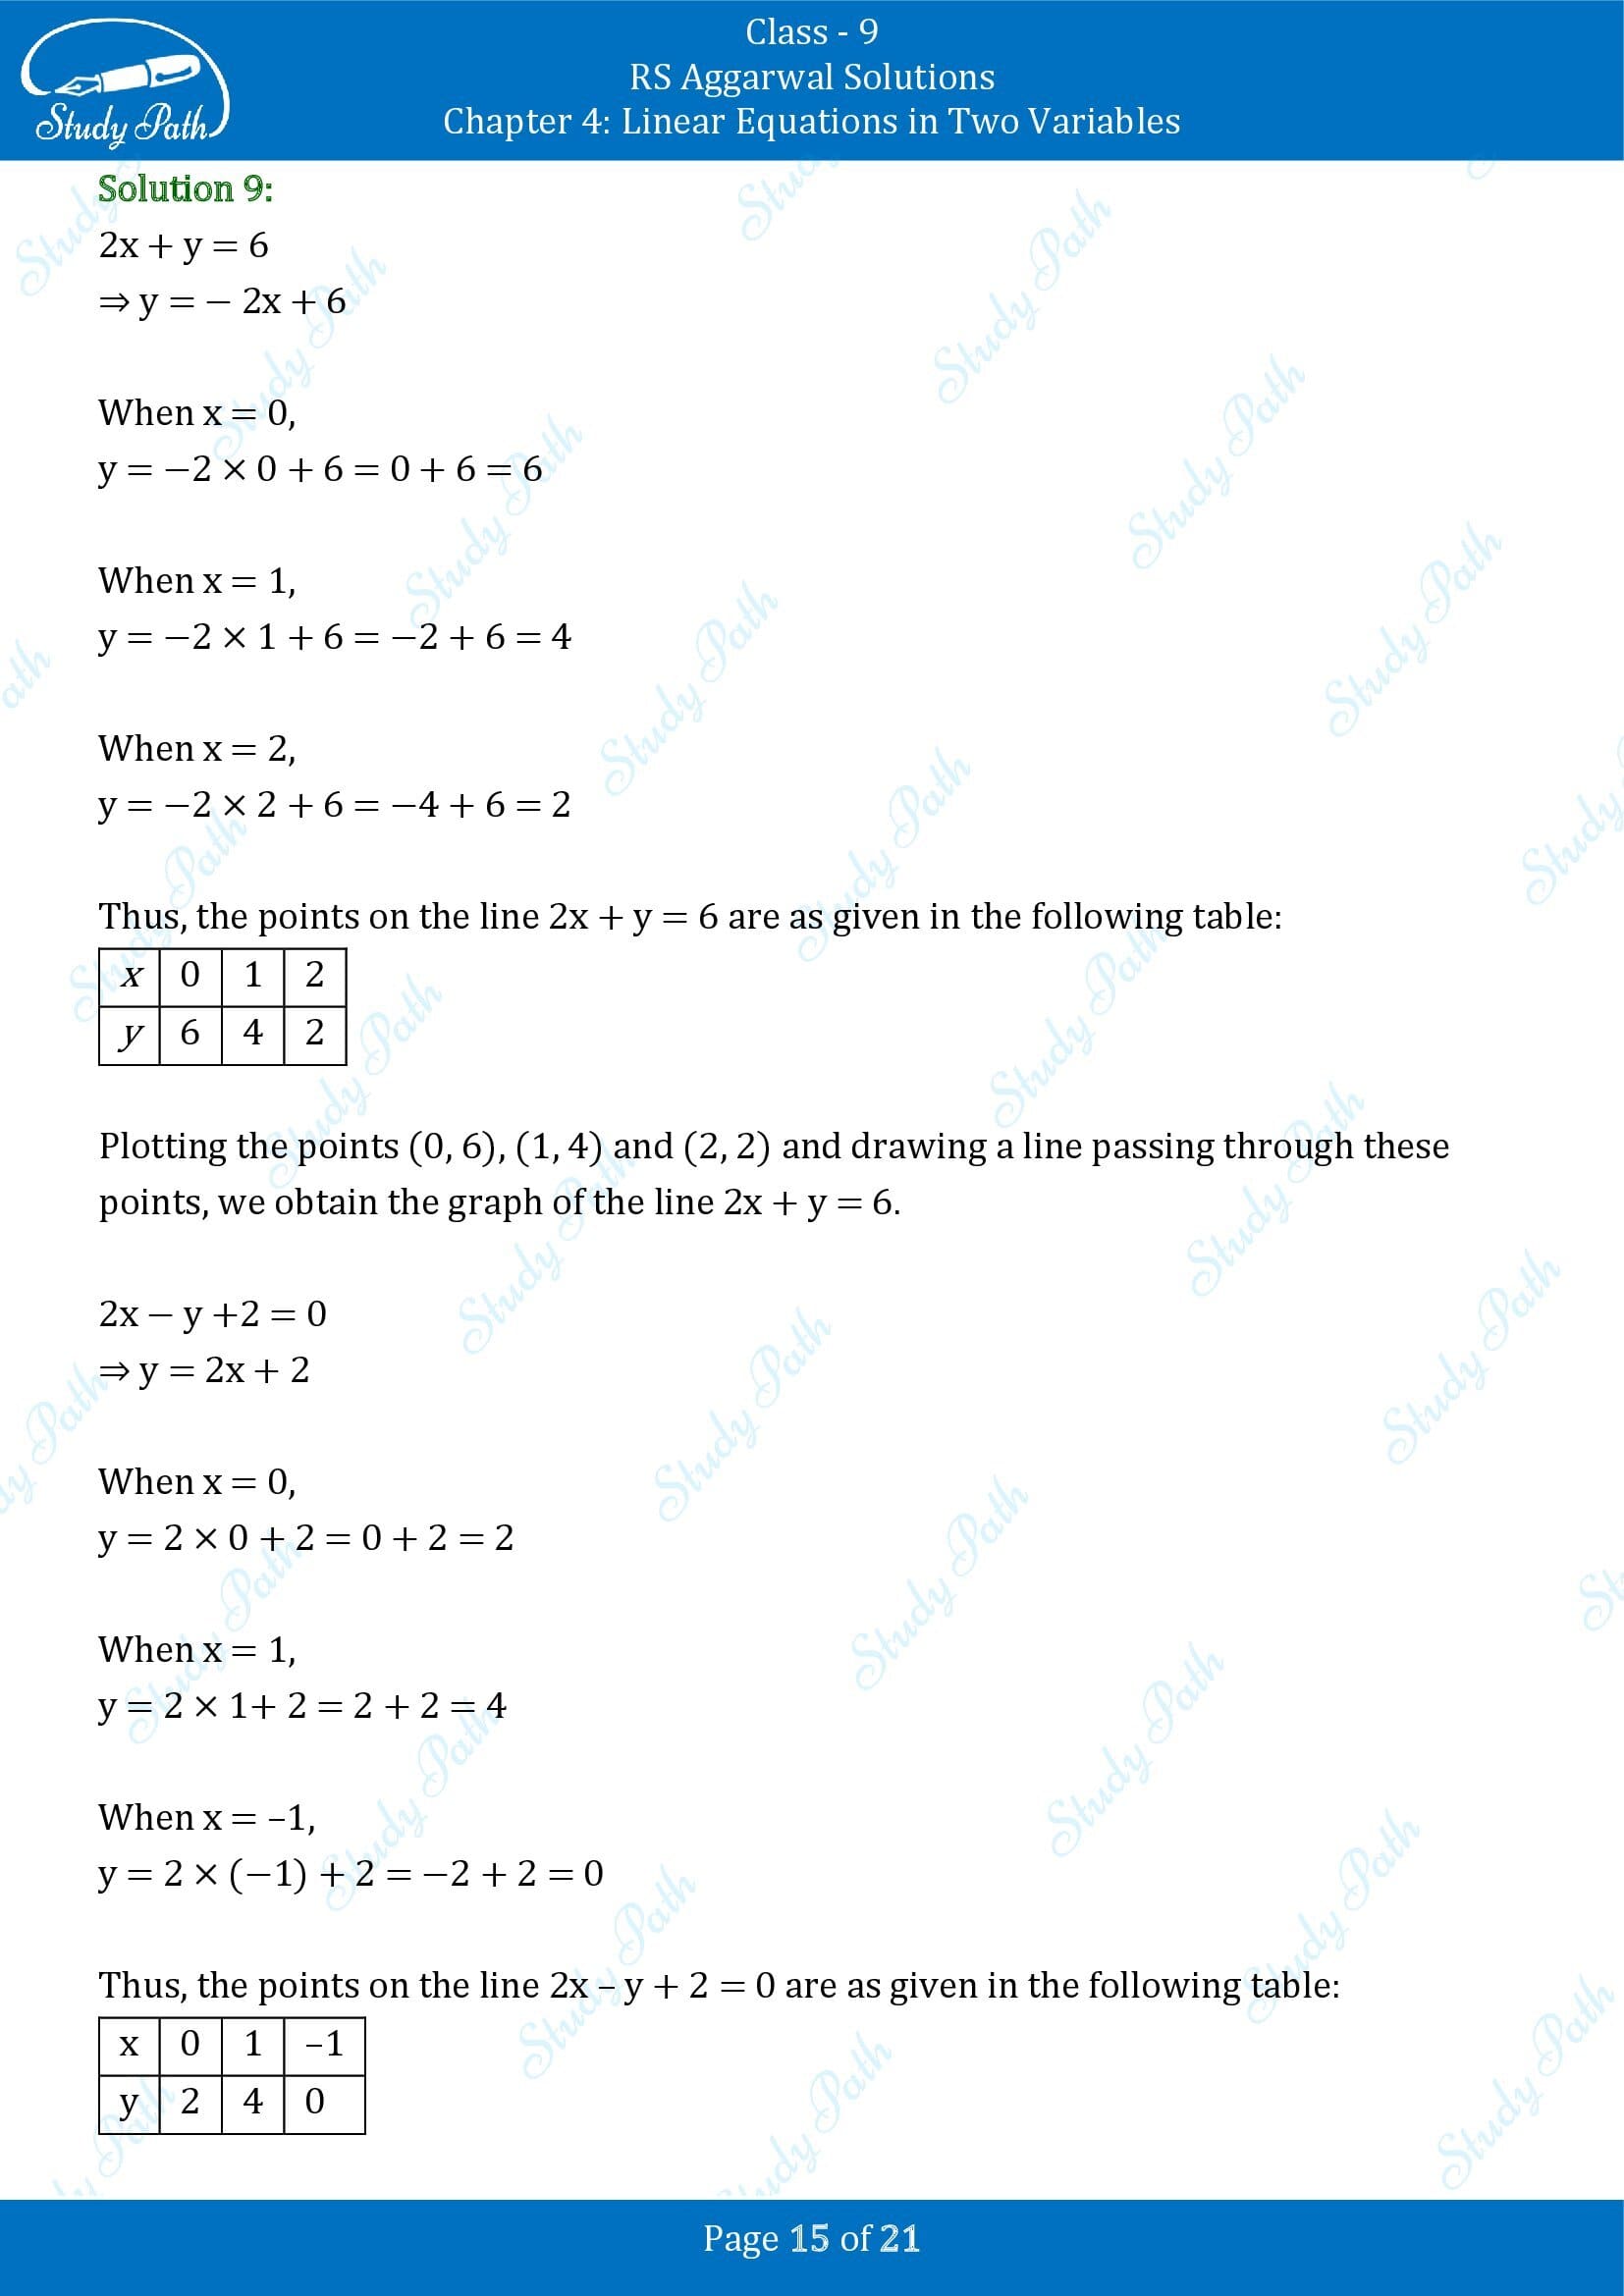 RS Aggarwal Solutions Class 9 Chapter 4 Linear Equations in Two Variables Exercise 4B 00015